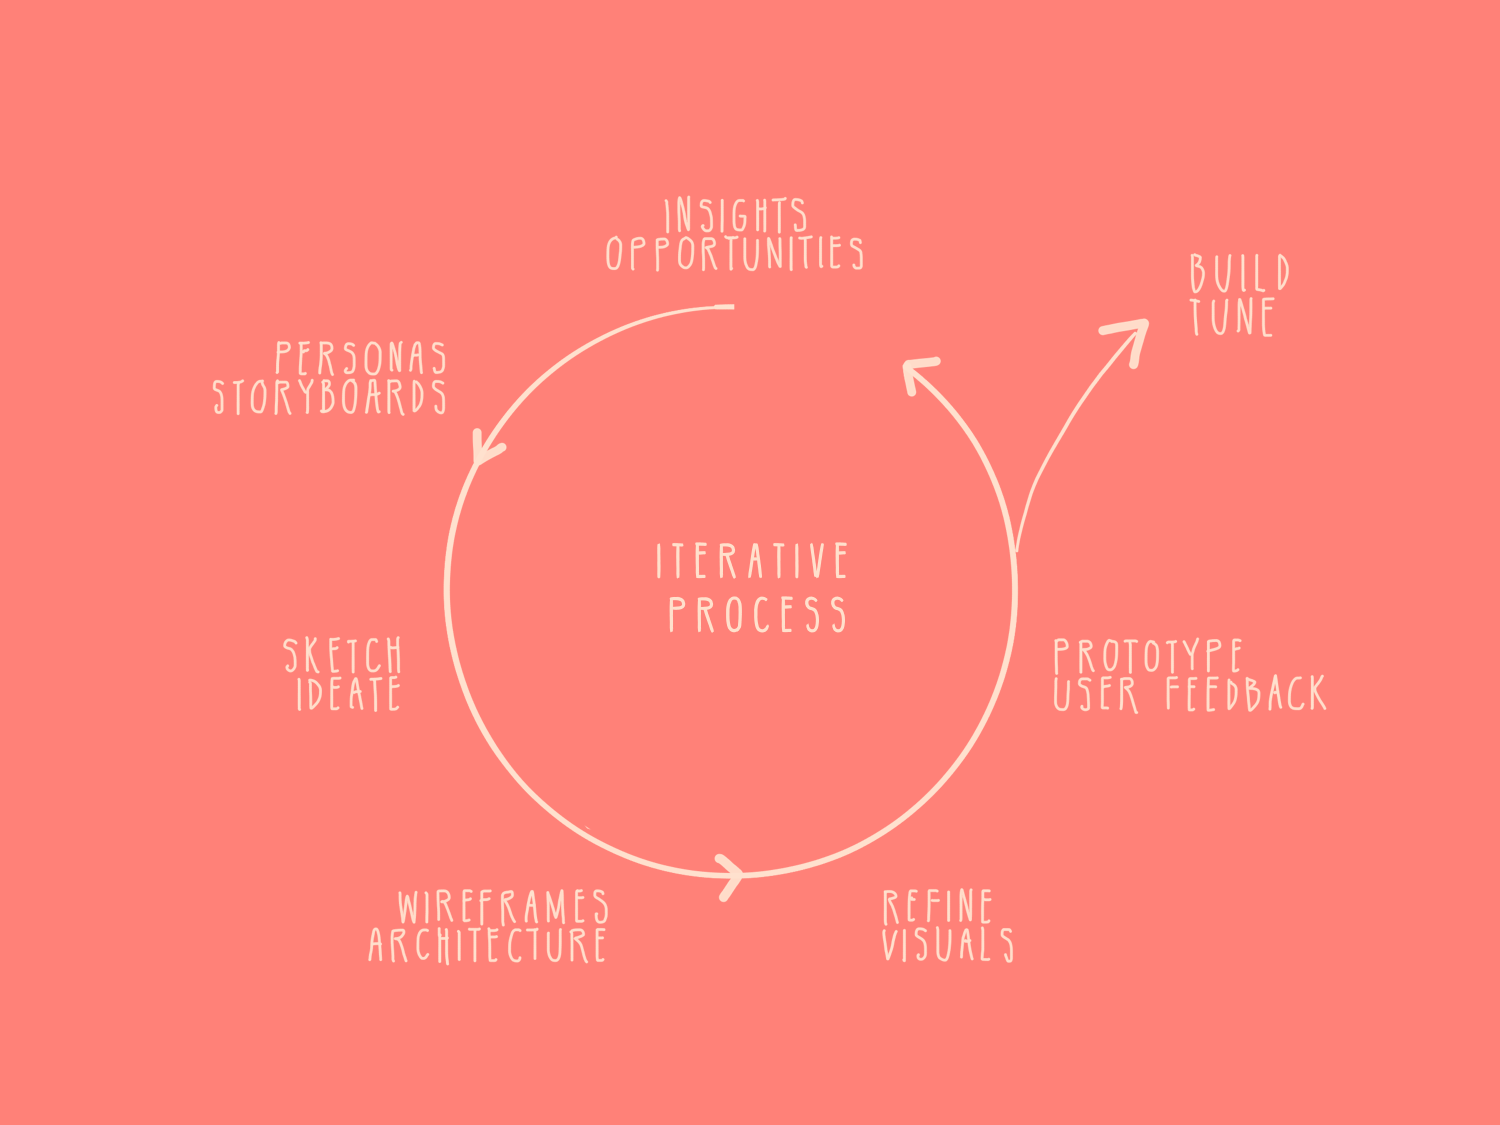  Product design and research is a process. Most products I work on are iterative.  